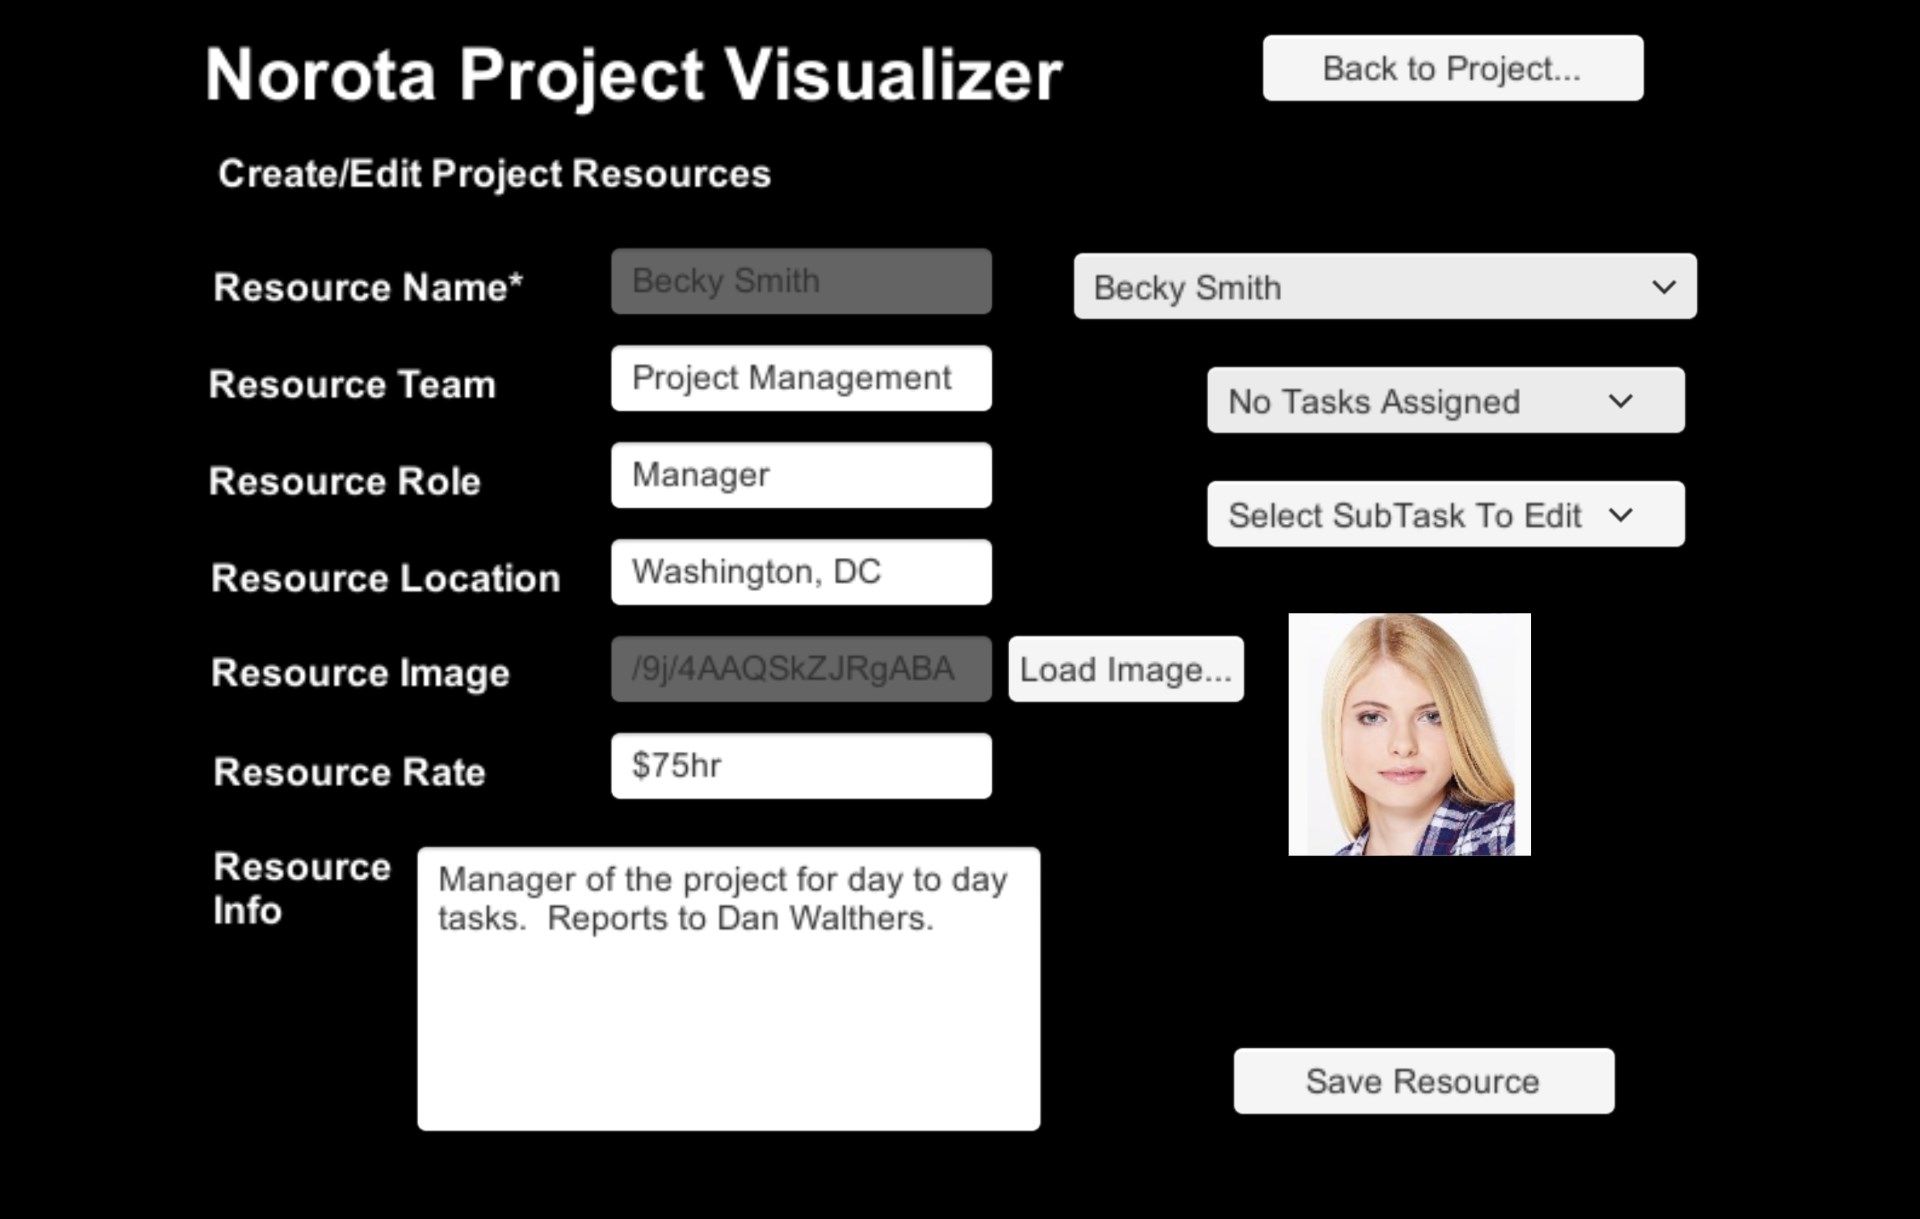 Quickly create and edit items in the Project Visualizer.